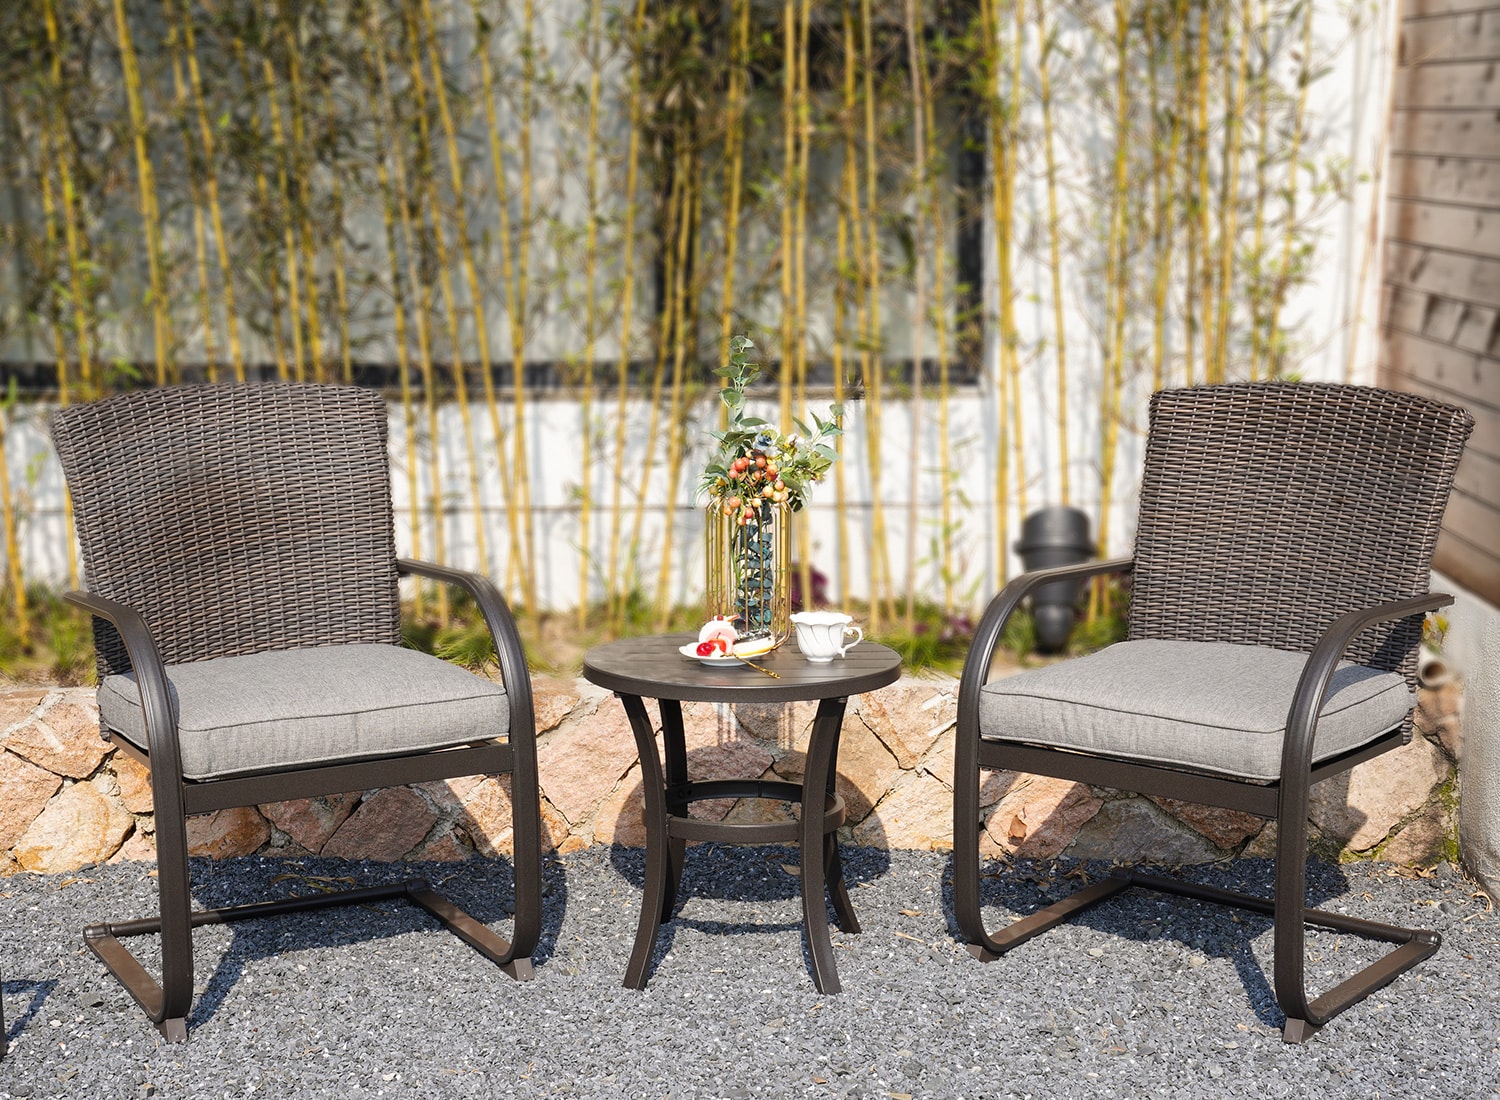 Outdoor Chairs Set Bistro Set 3 Pieces Patio Conversation Set Furniture Set for Small Balcony Rattan Chairs and Table with Cushions Blue 